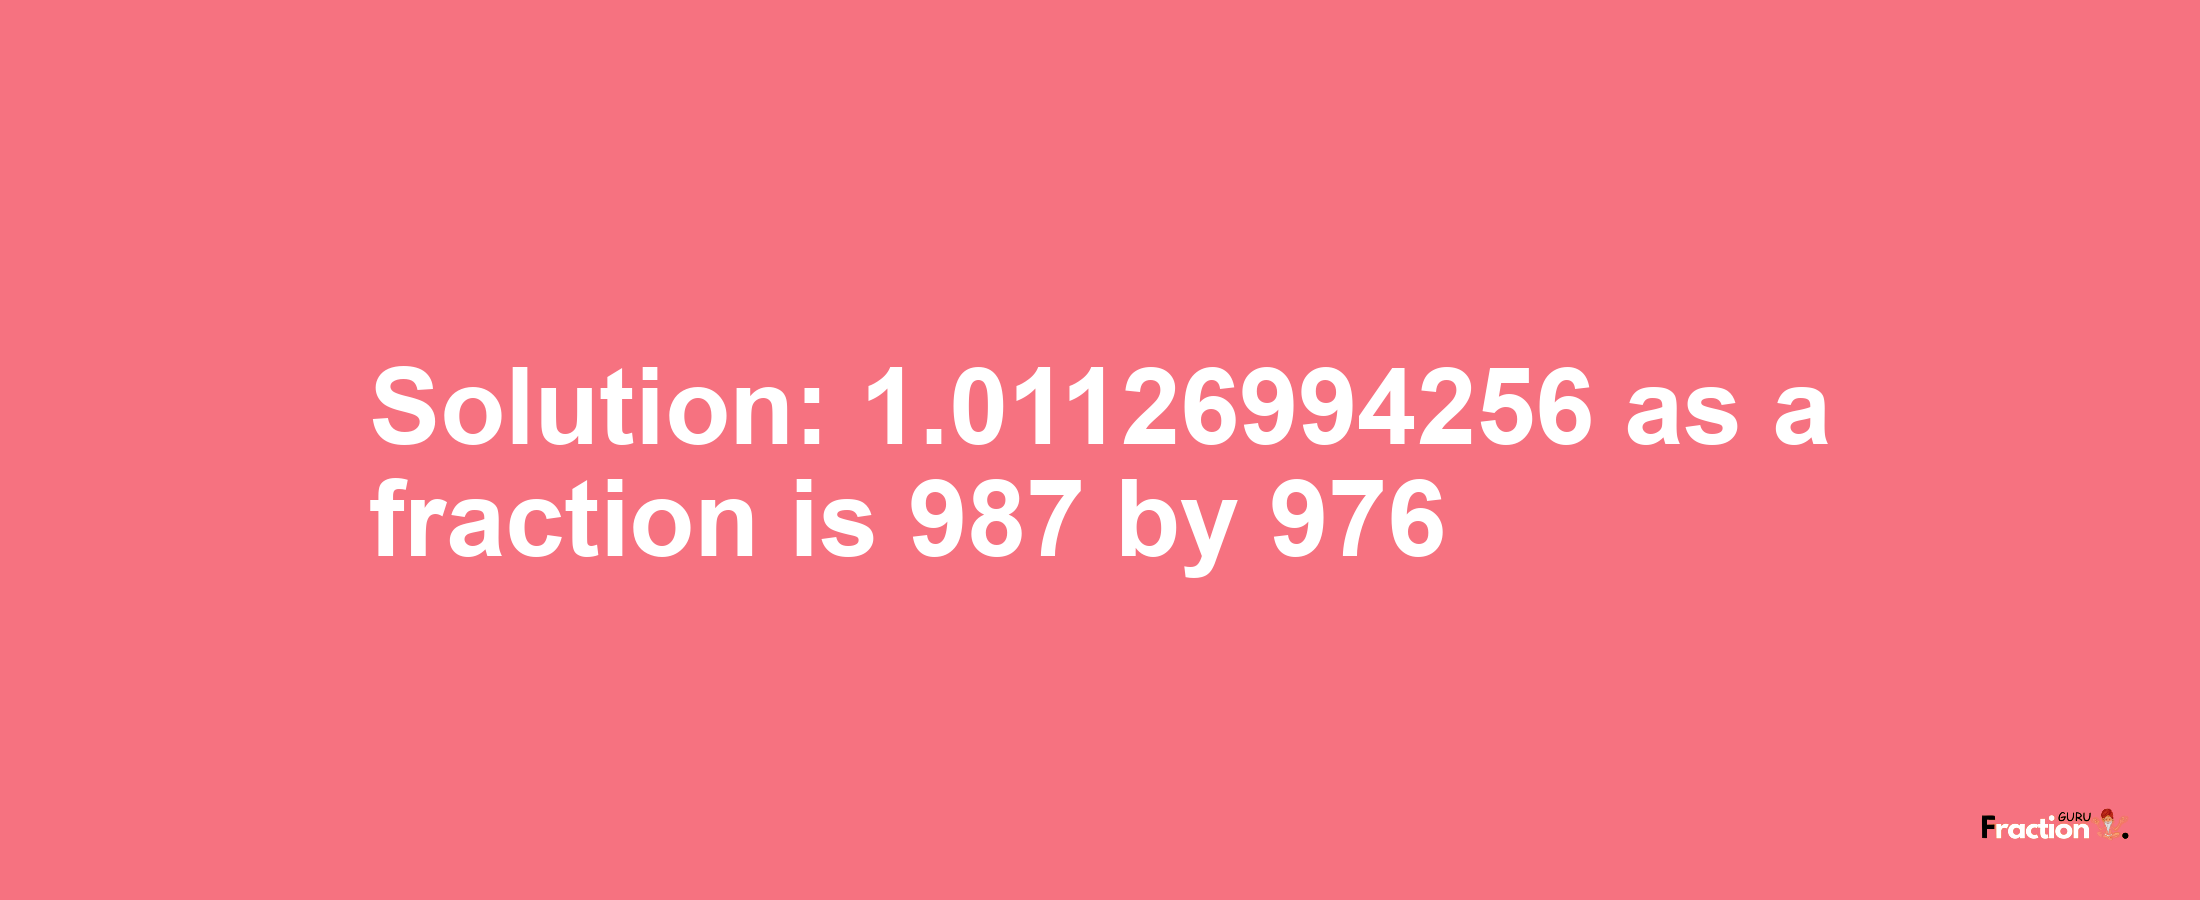 Solution:1.01126994256 as a fraction is 987/976